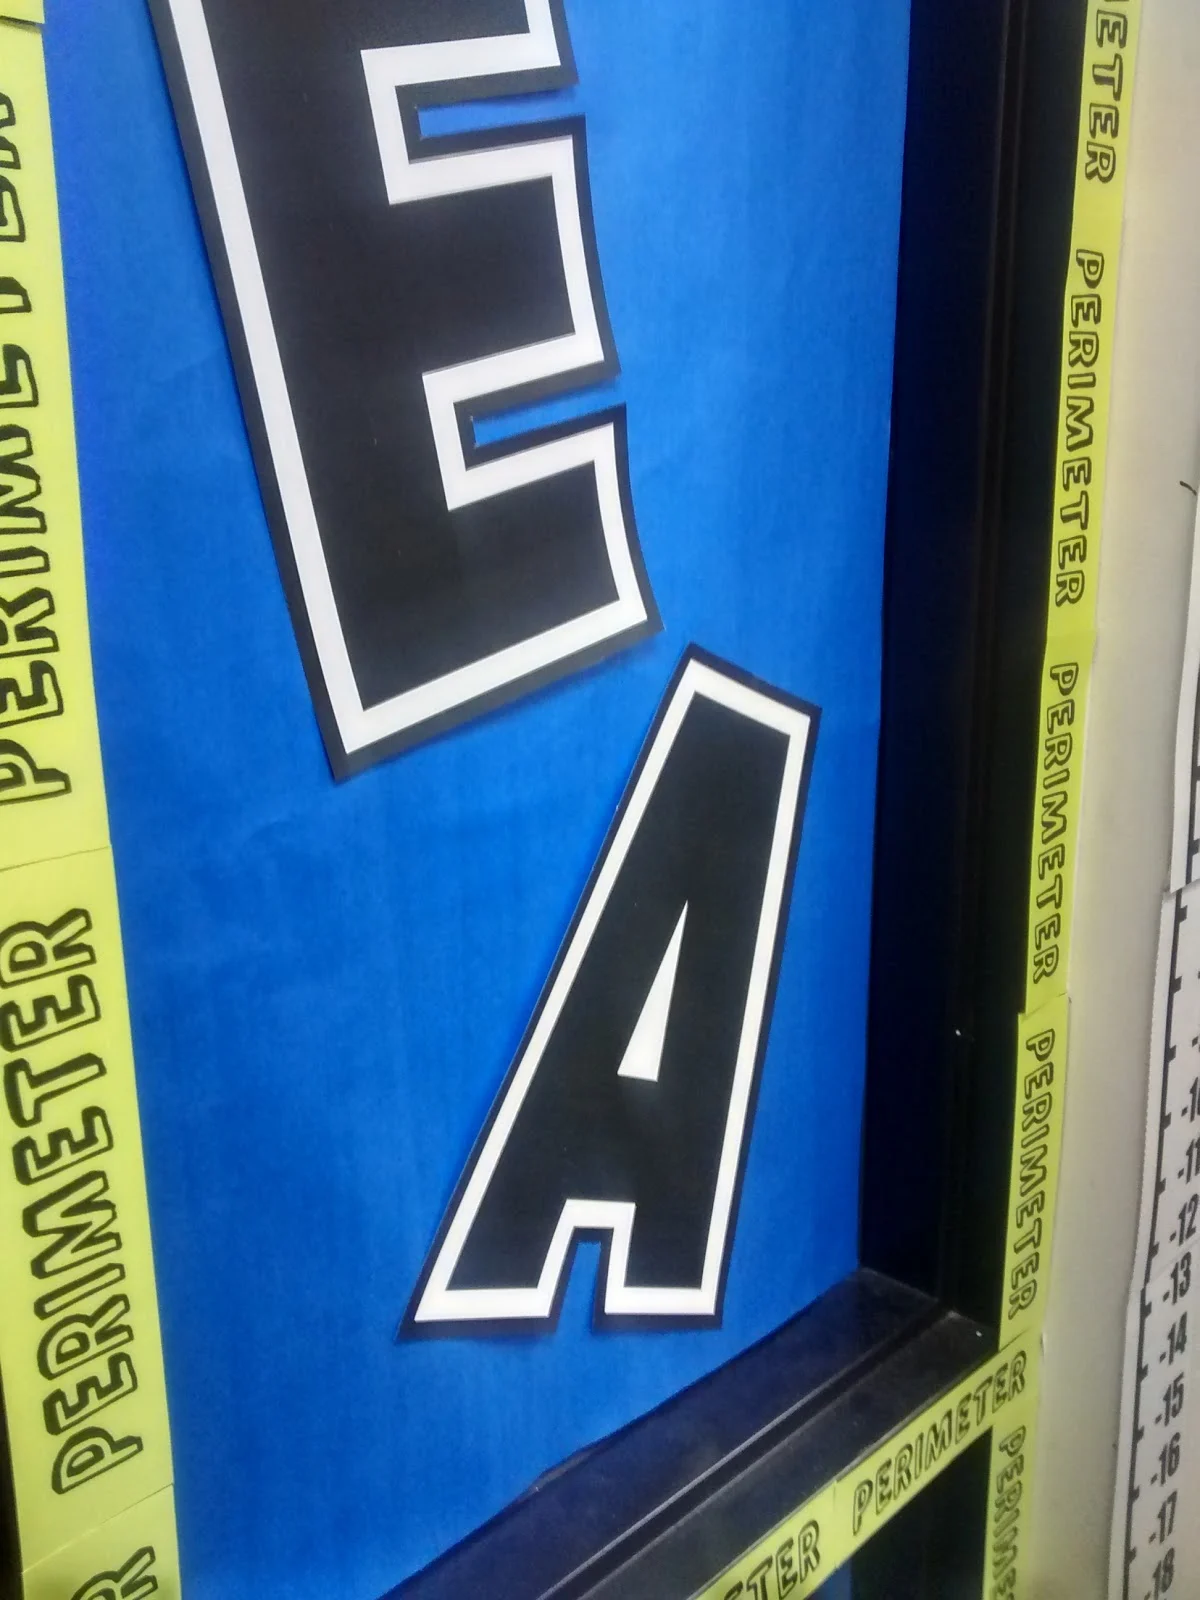 Area and Perimeter Posters - High School Math Classroom Decorations